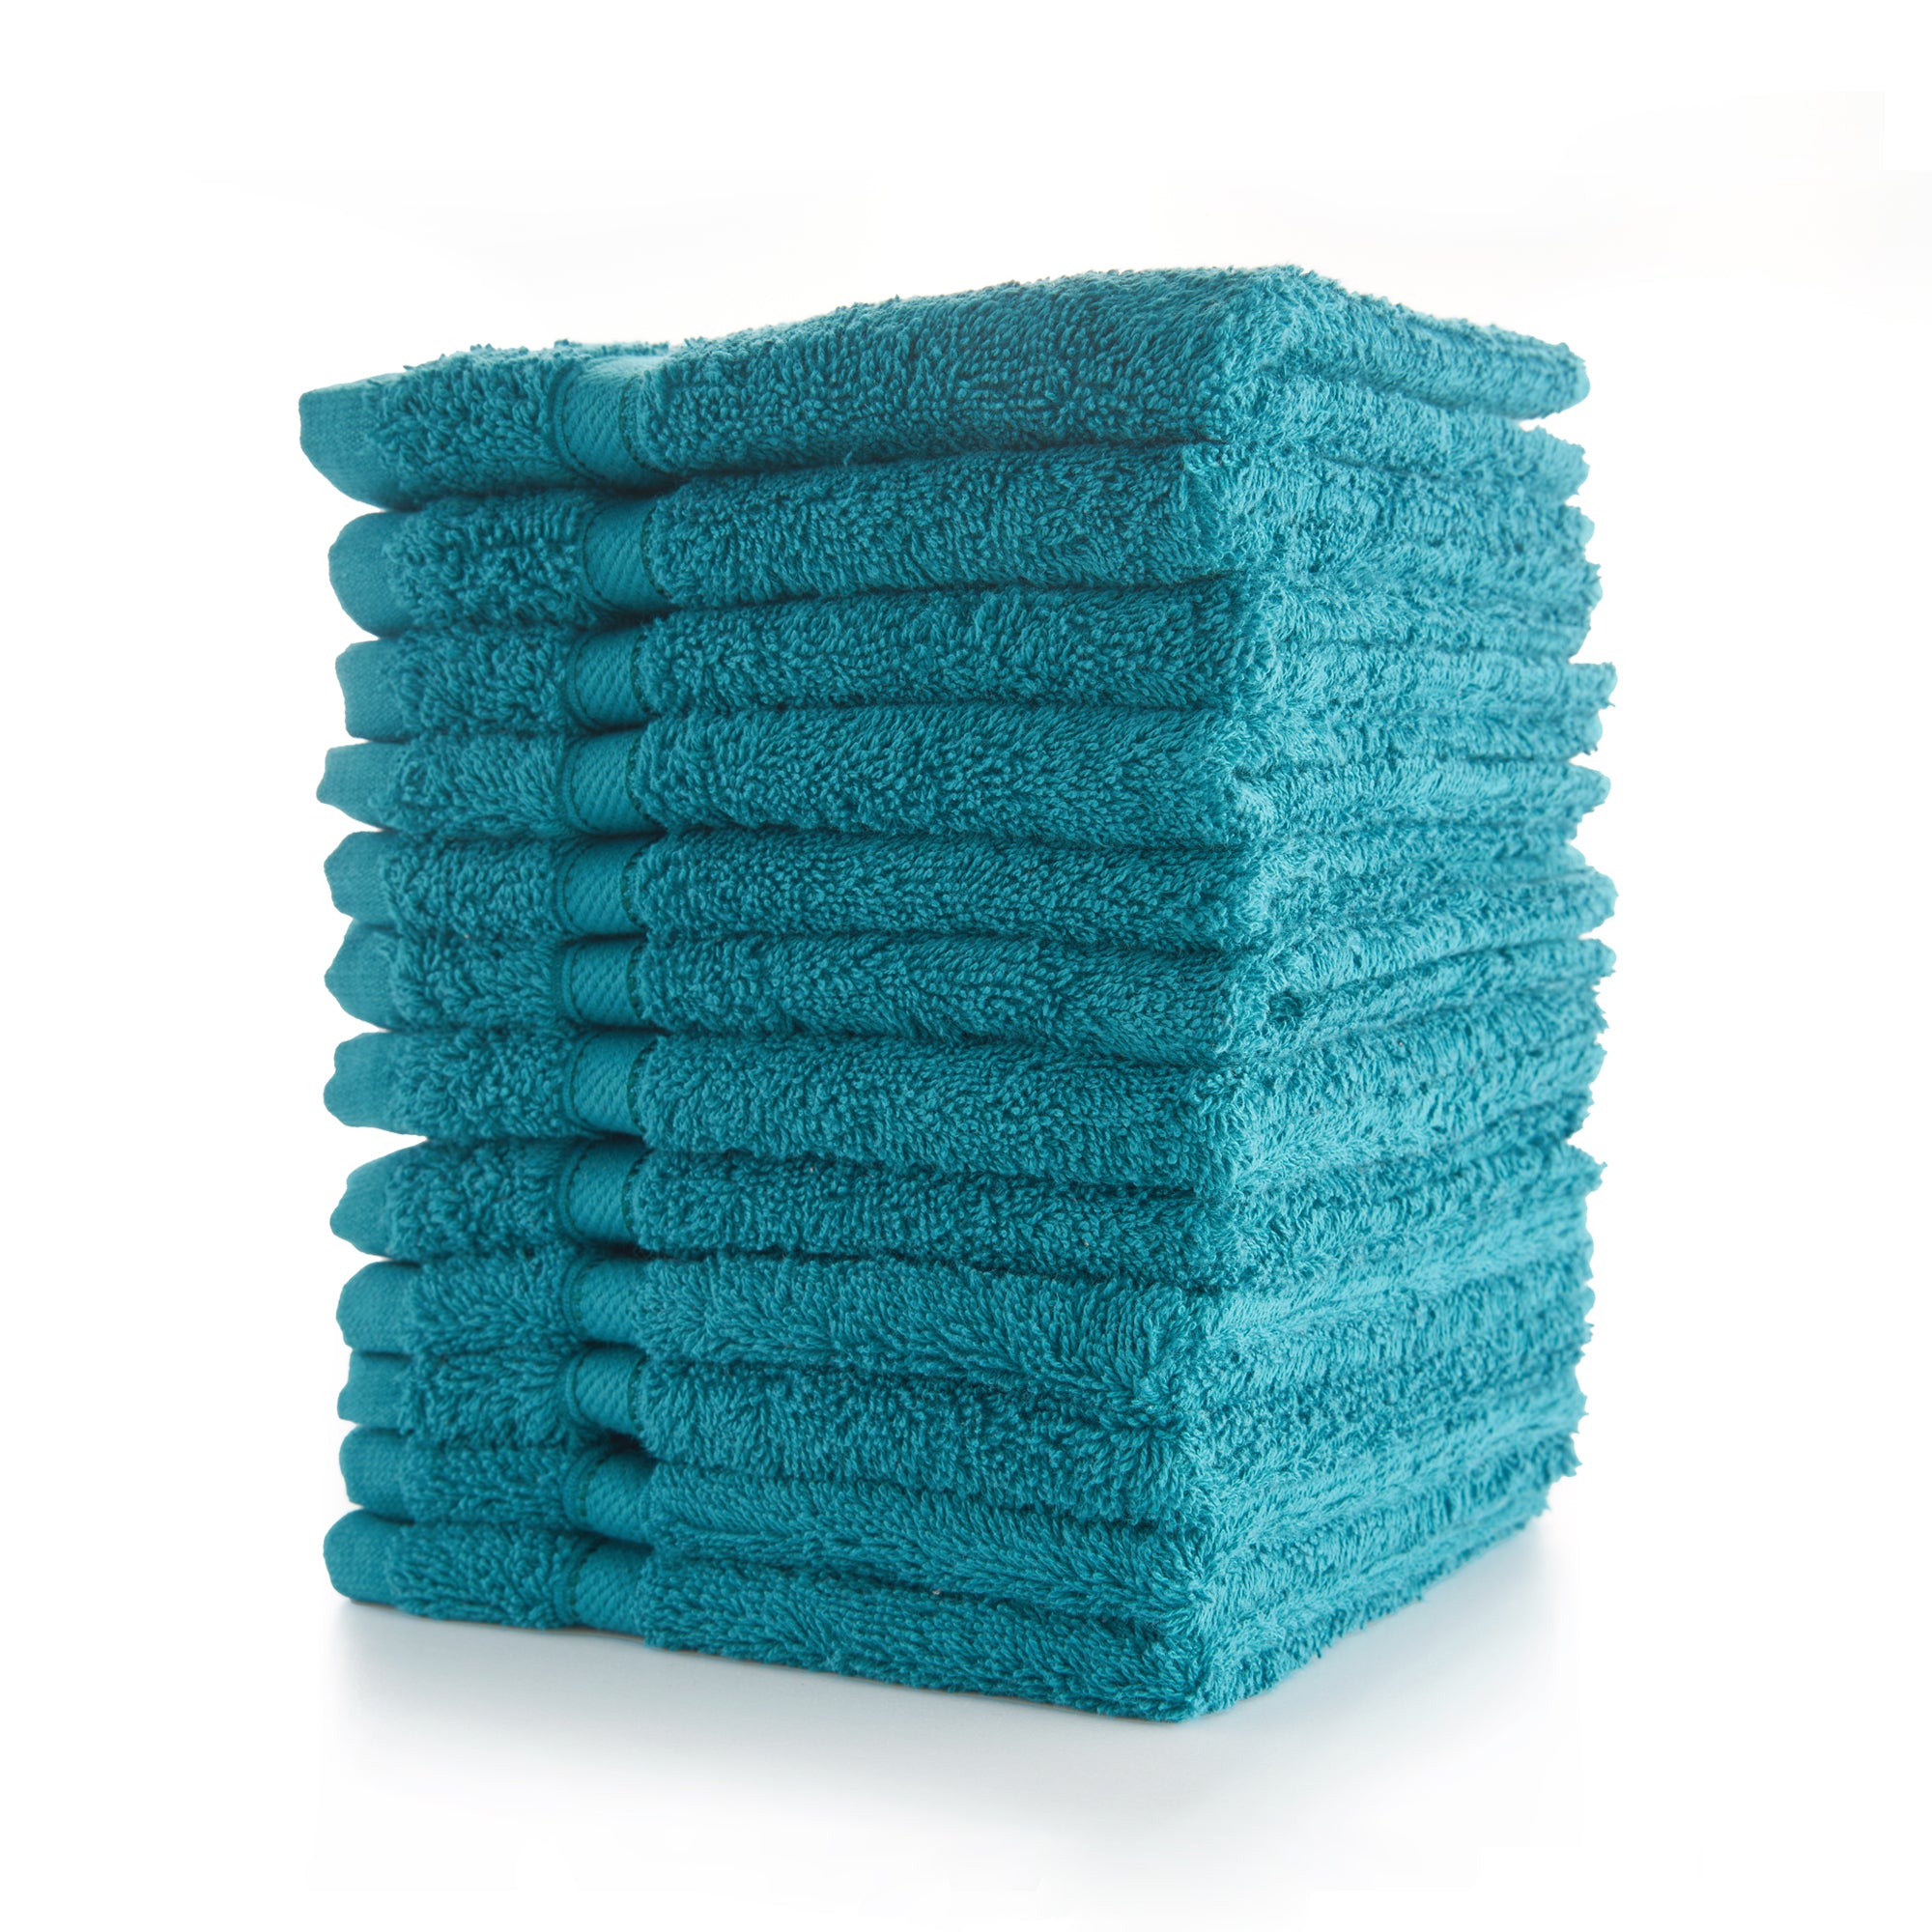 Mellanni Washcloth 12 inchx12 inch, 100% Terry Cotton, 12 Pack, Teal, Size: 12 x 12, Green